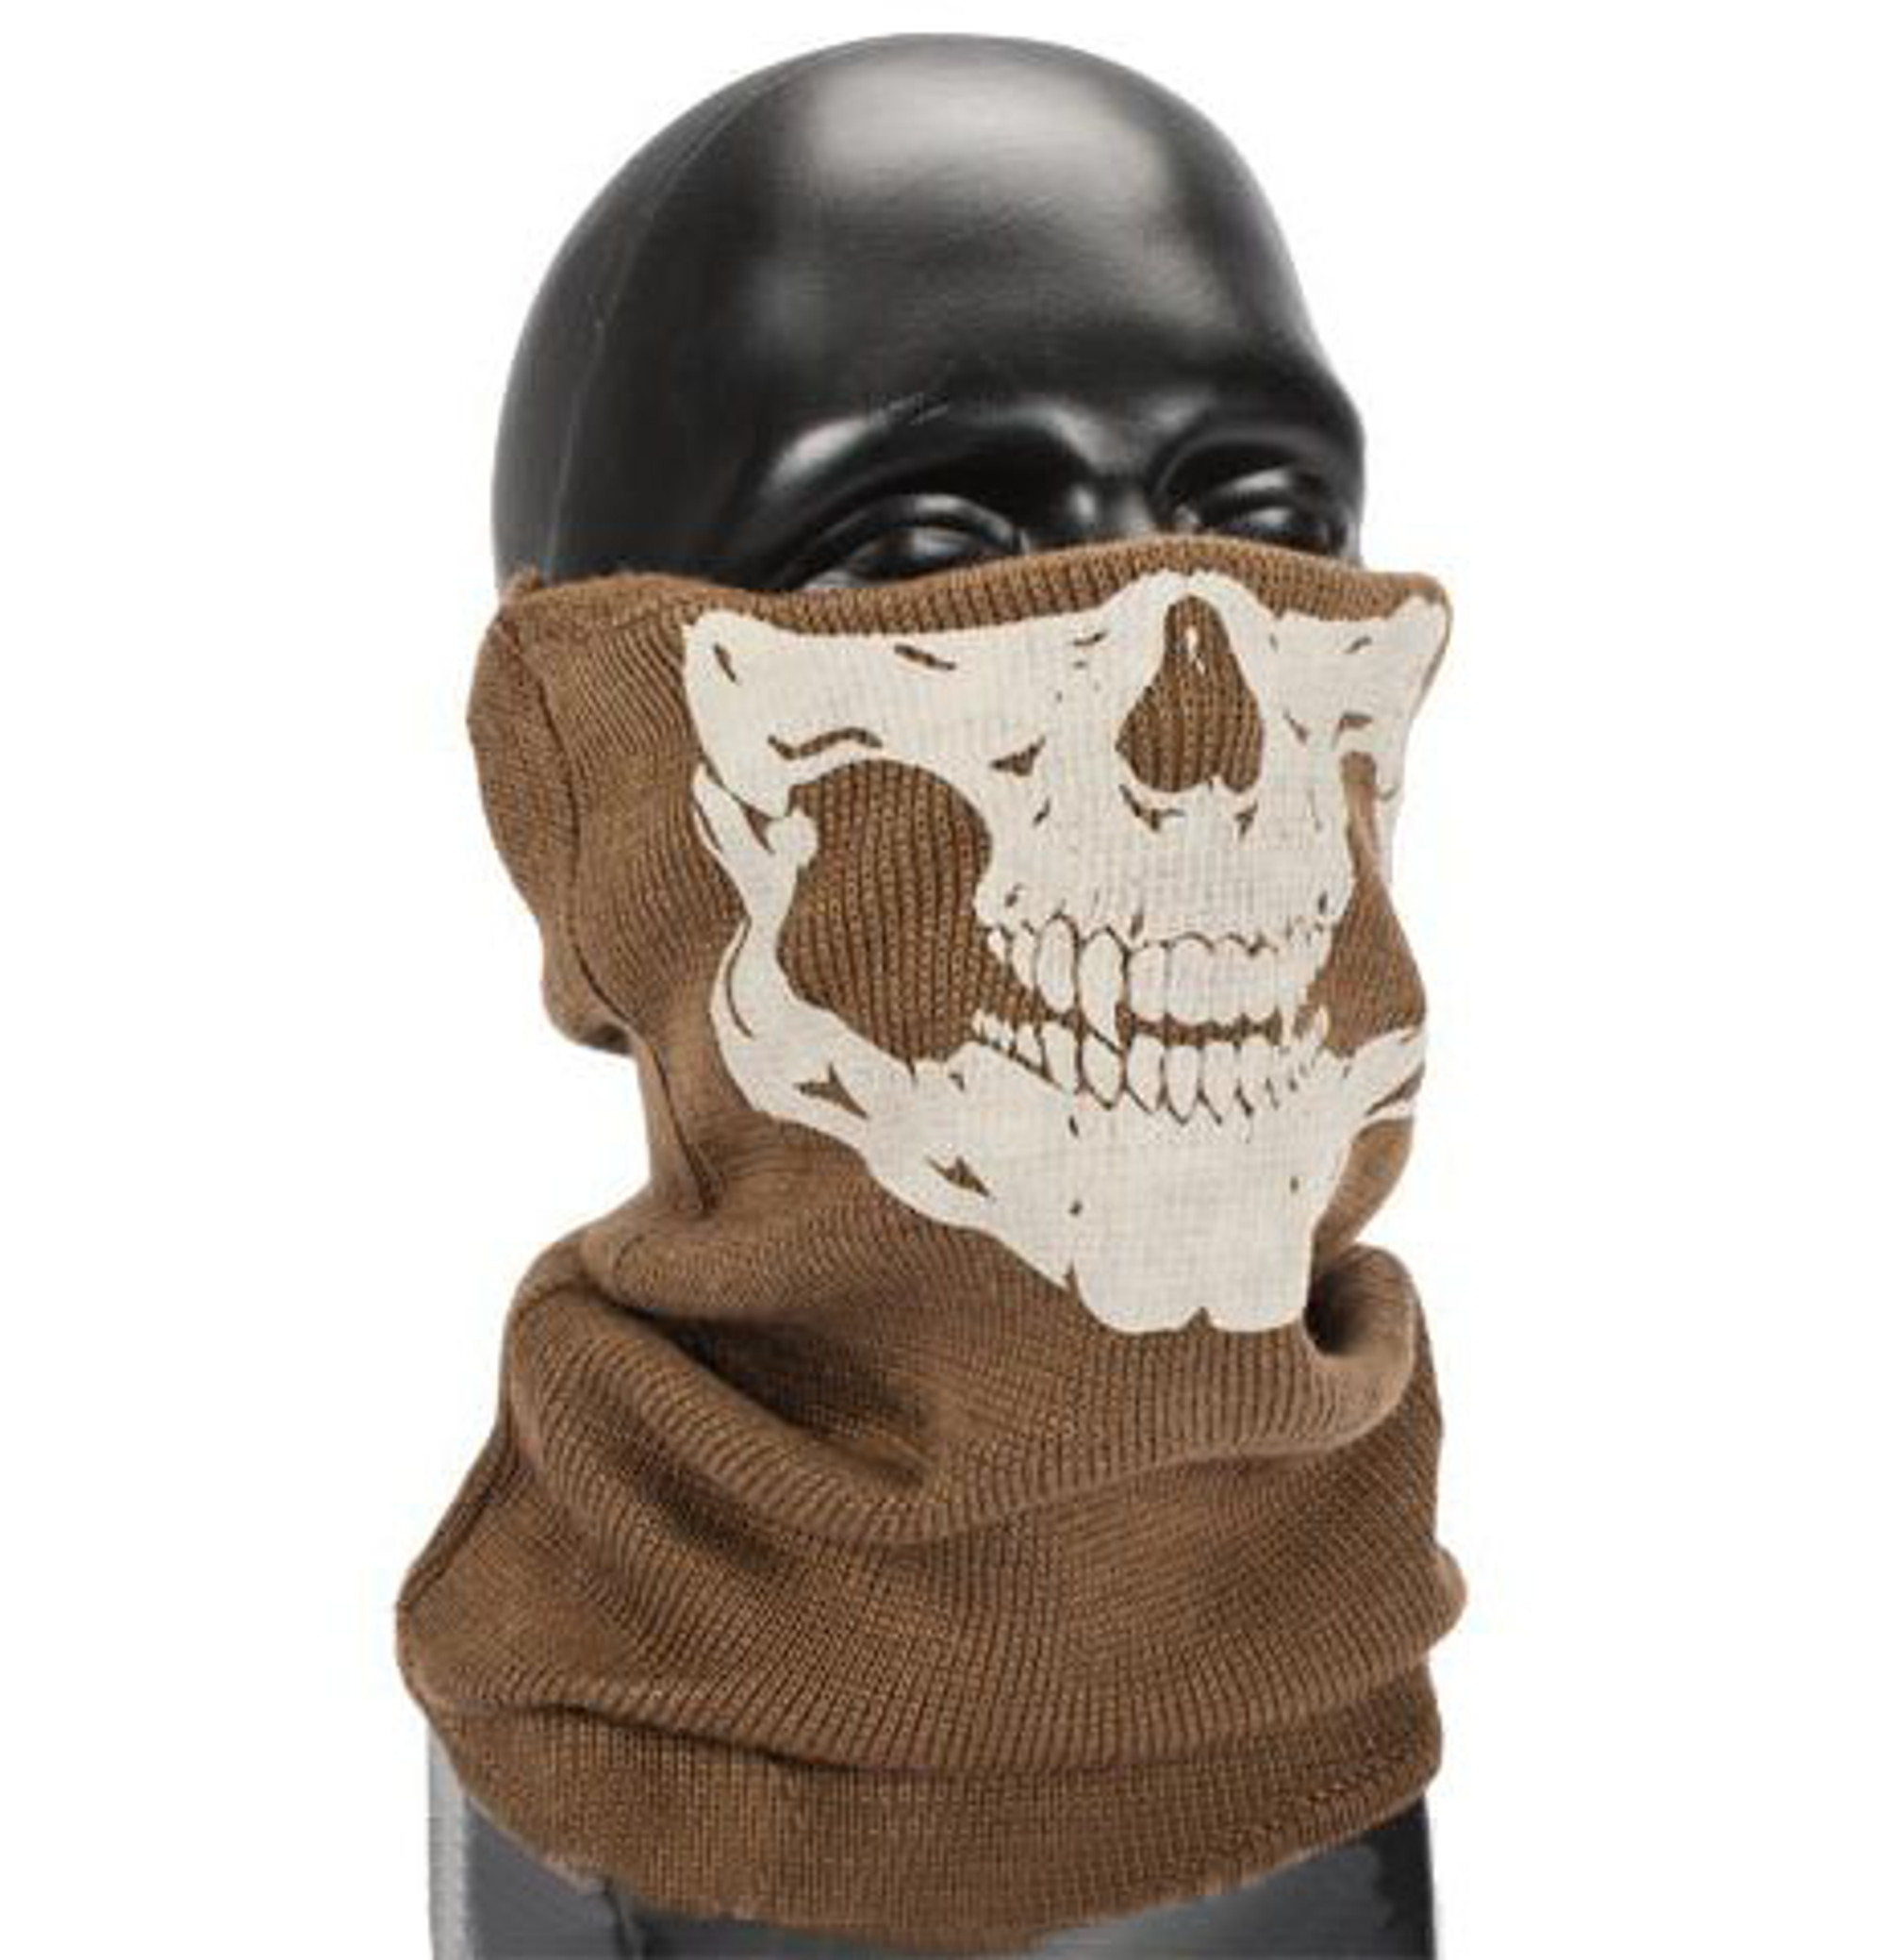 Matrix "Ghost" Special Forces Neck Gaiter - Coyote Brown